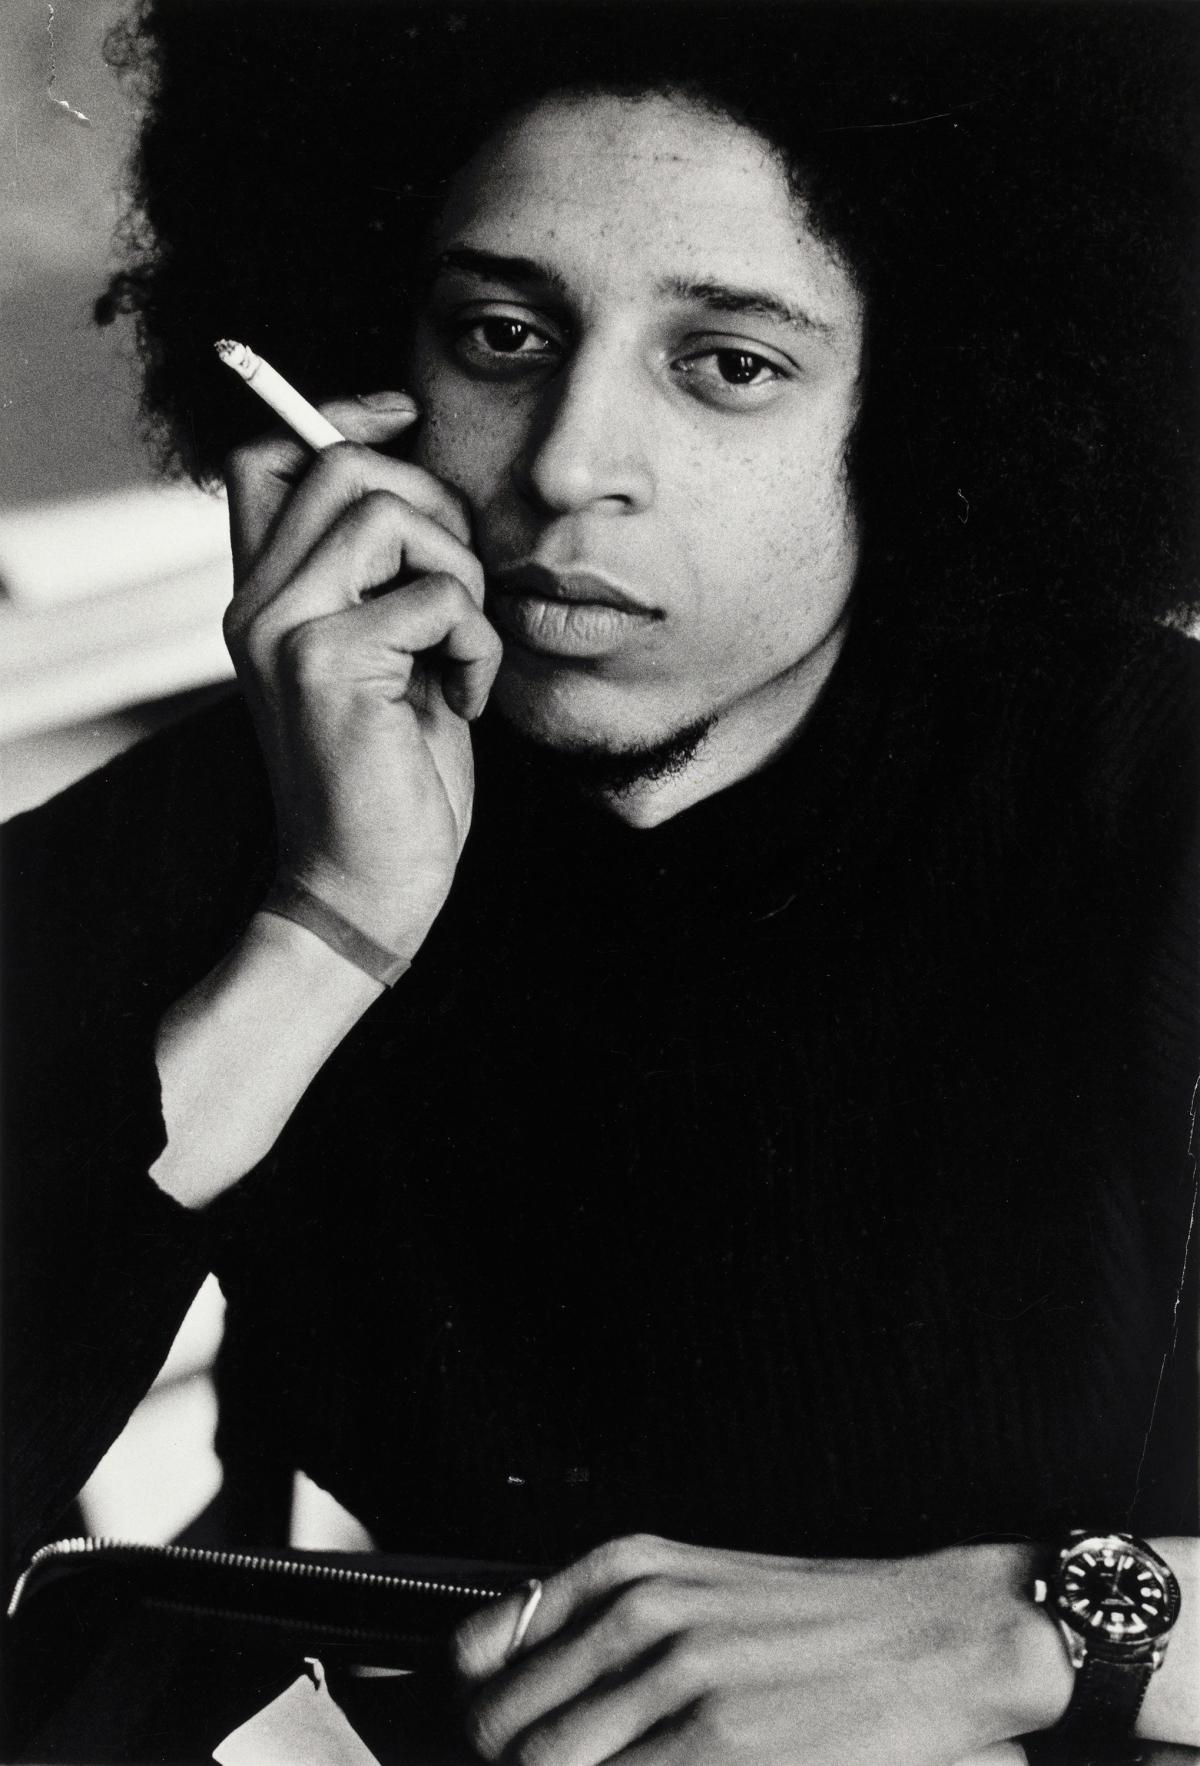 An intimate portrait of a young Black man seated and holding a cigarette